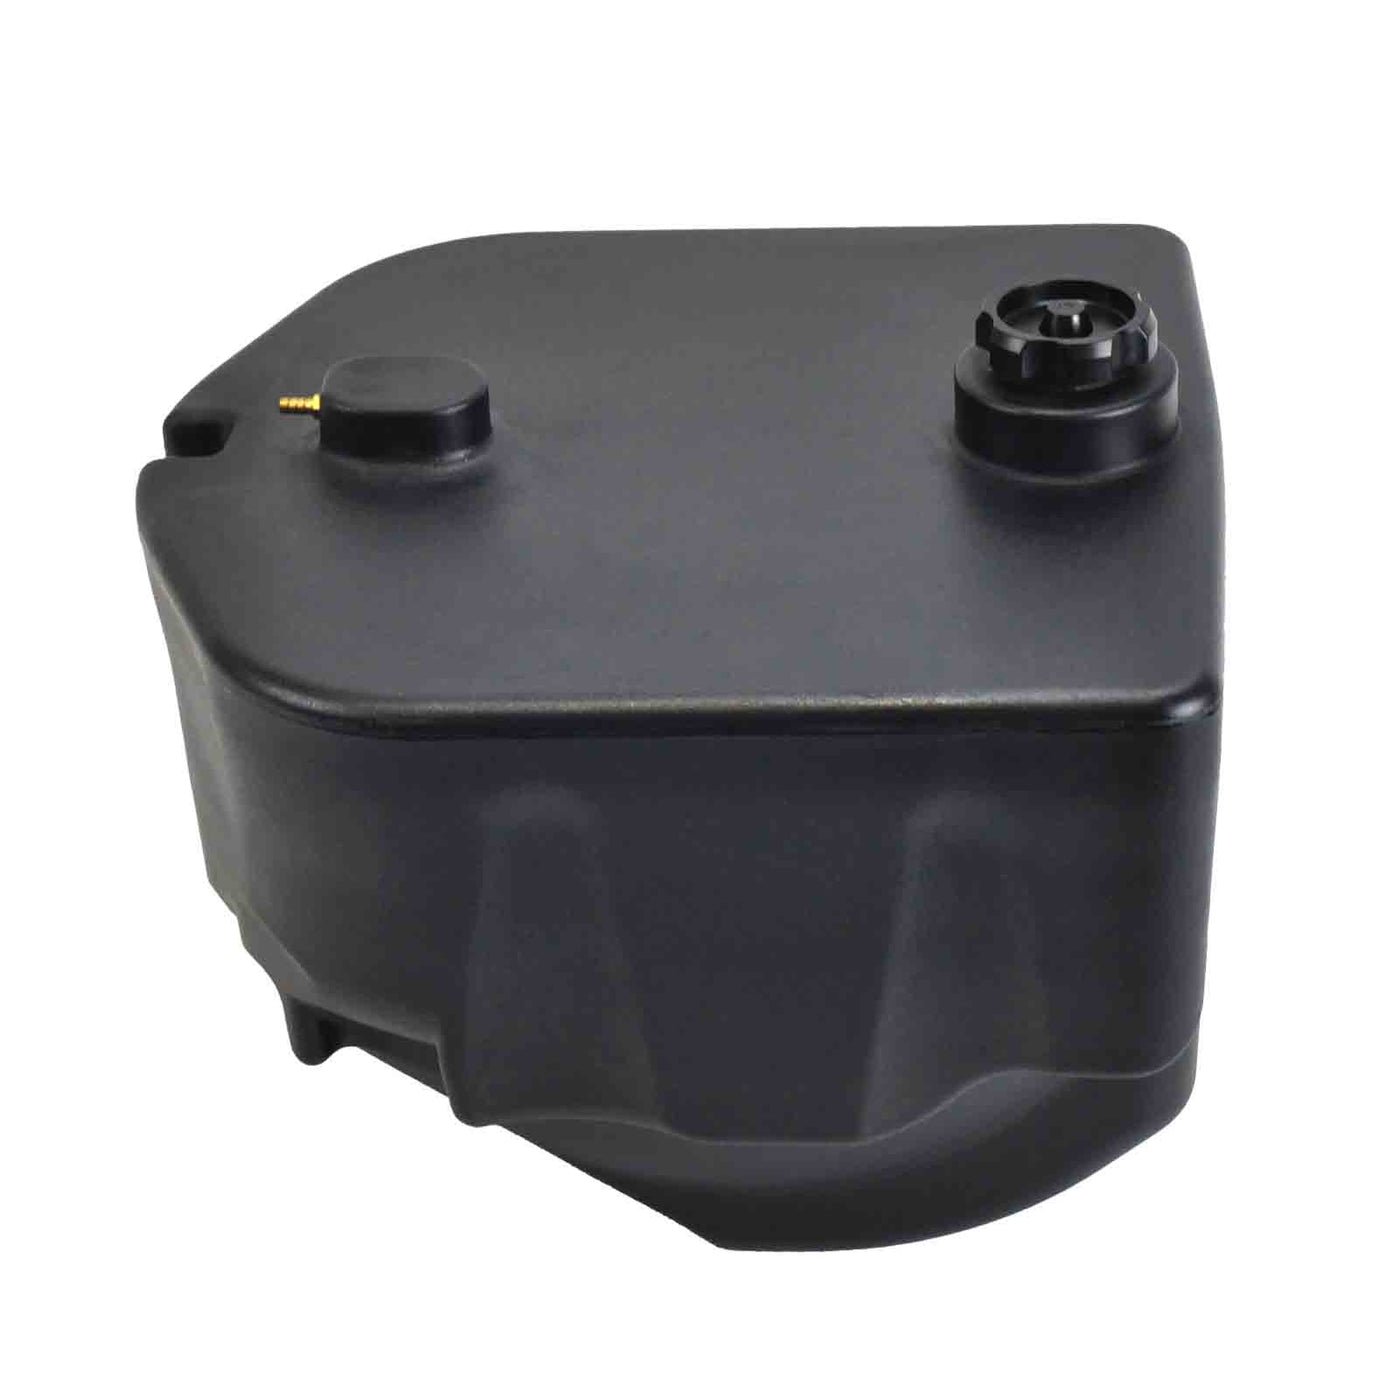 YAMAHA Motorcycle Auxiliary Fuel Tank Made of PE Material for Yamaha TMAX Tech Max From Year 2019-2022 TMAX560 (12.6x11.8x10.2 inches, 10L) Year 2023 TMAX 560/Year From 2018 TMAX 530 Please Contact Us First